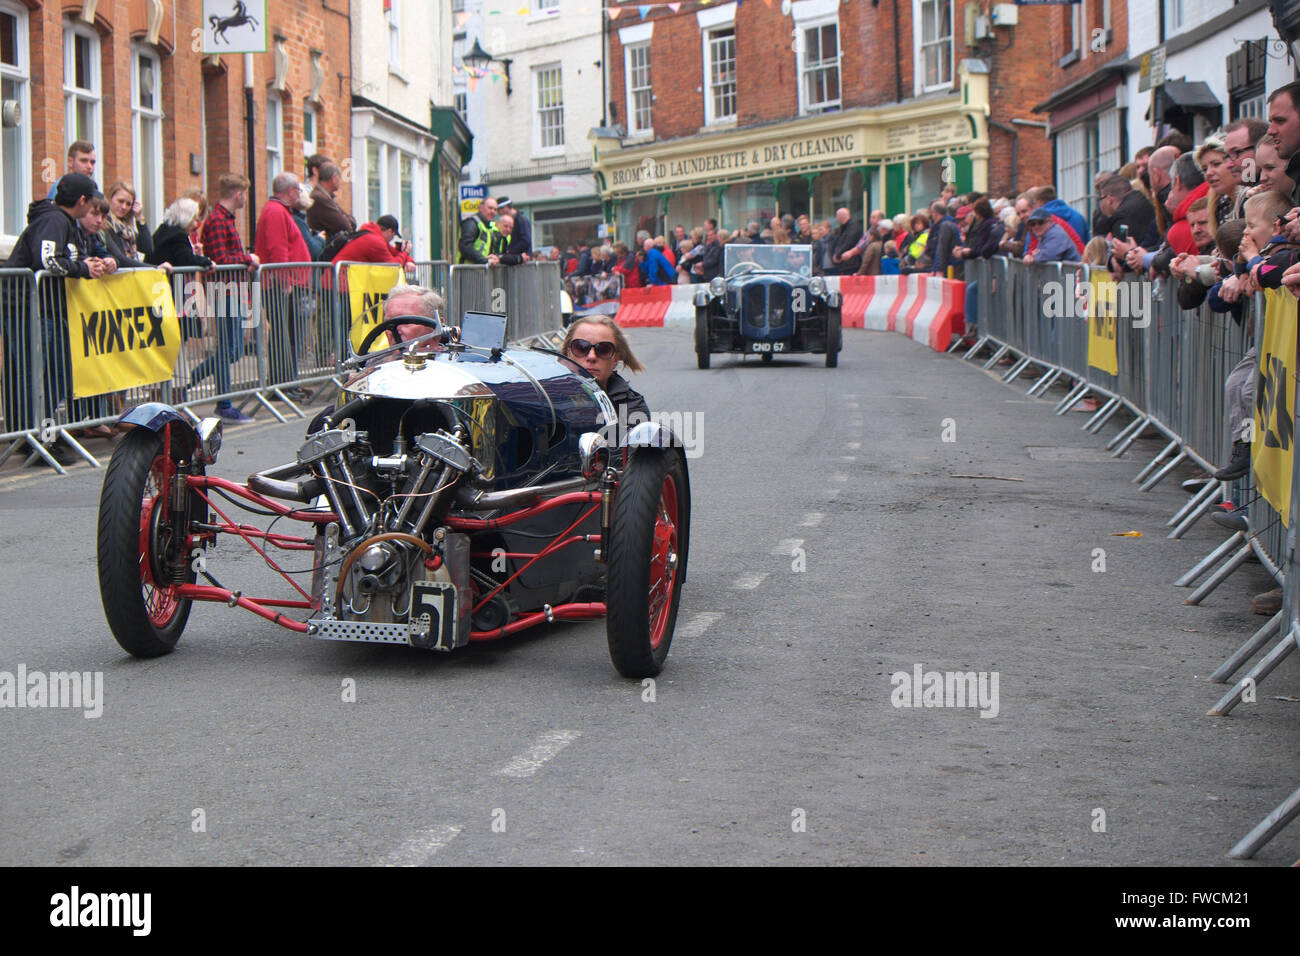 Bromyard Herefordshire April 2016 - the inaugural Speed Festival through the streets of Bromyard the birthplace of the Morgan Motoring Company. Shown here driving through the town is a 1933 Morgan Super Sports three wheeler vintage car. Stock Photo